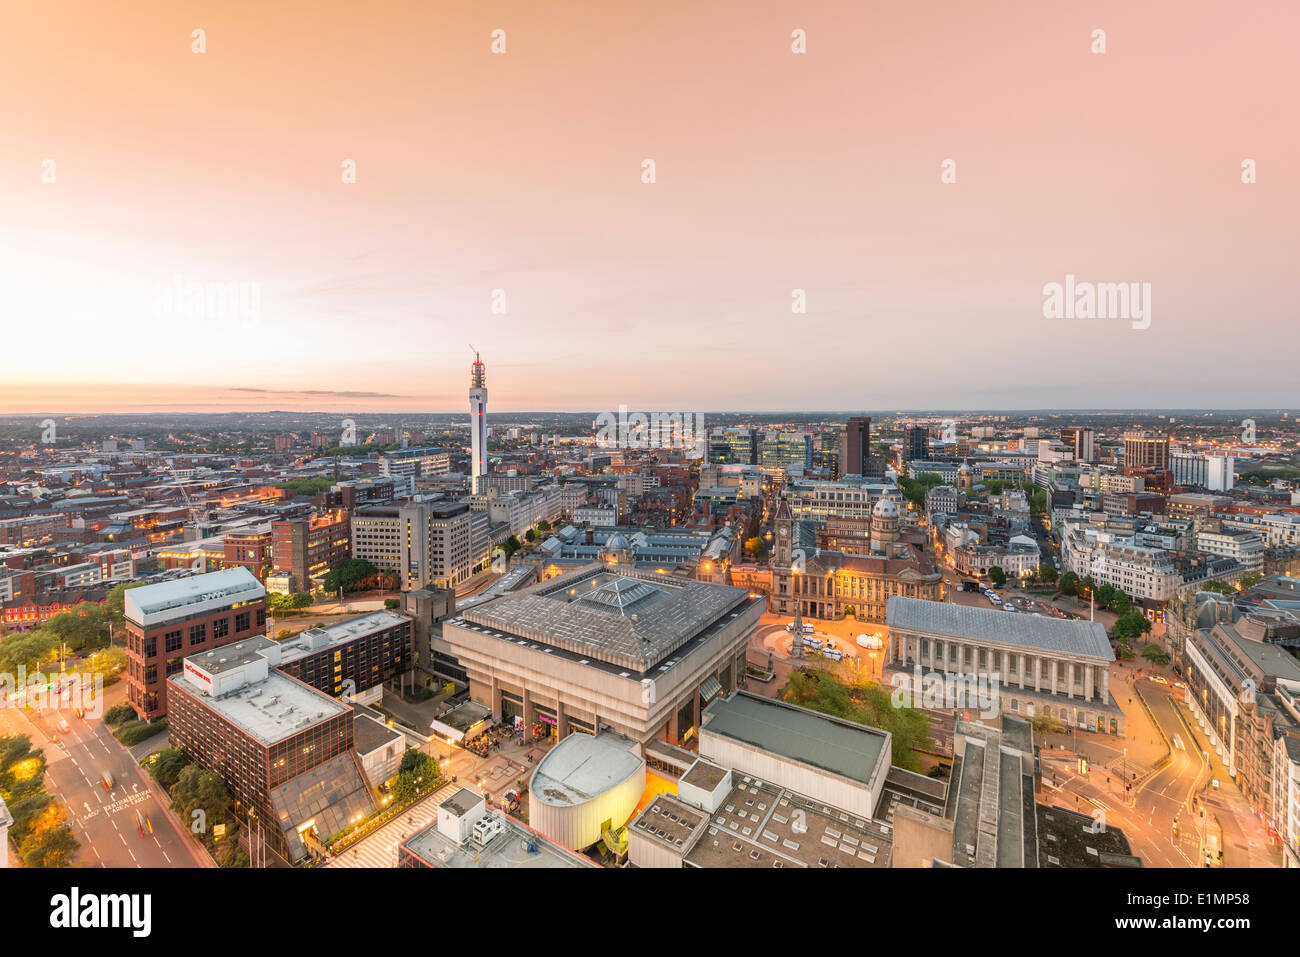 A night view of Birmingham city centre at night. Stock Photo